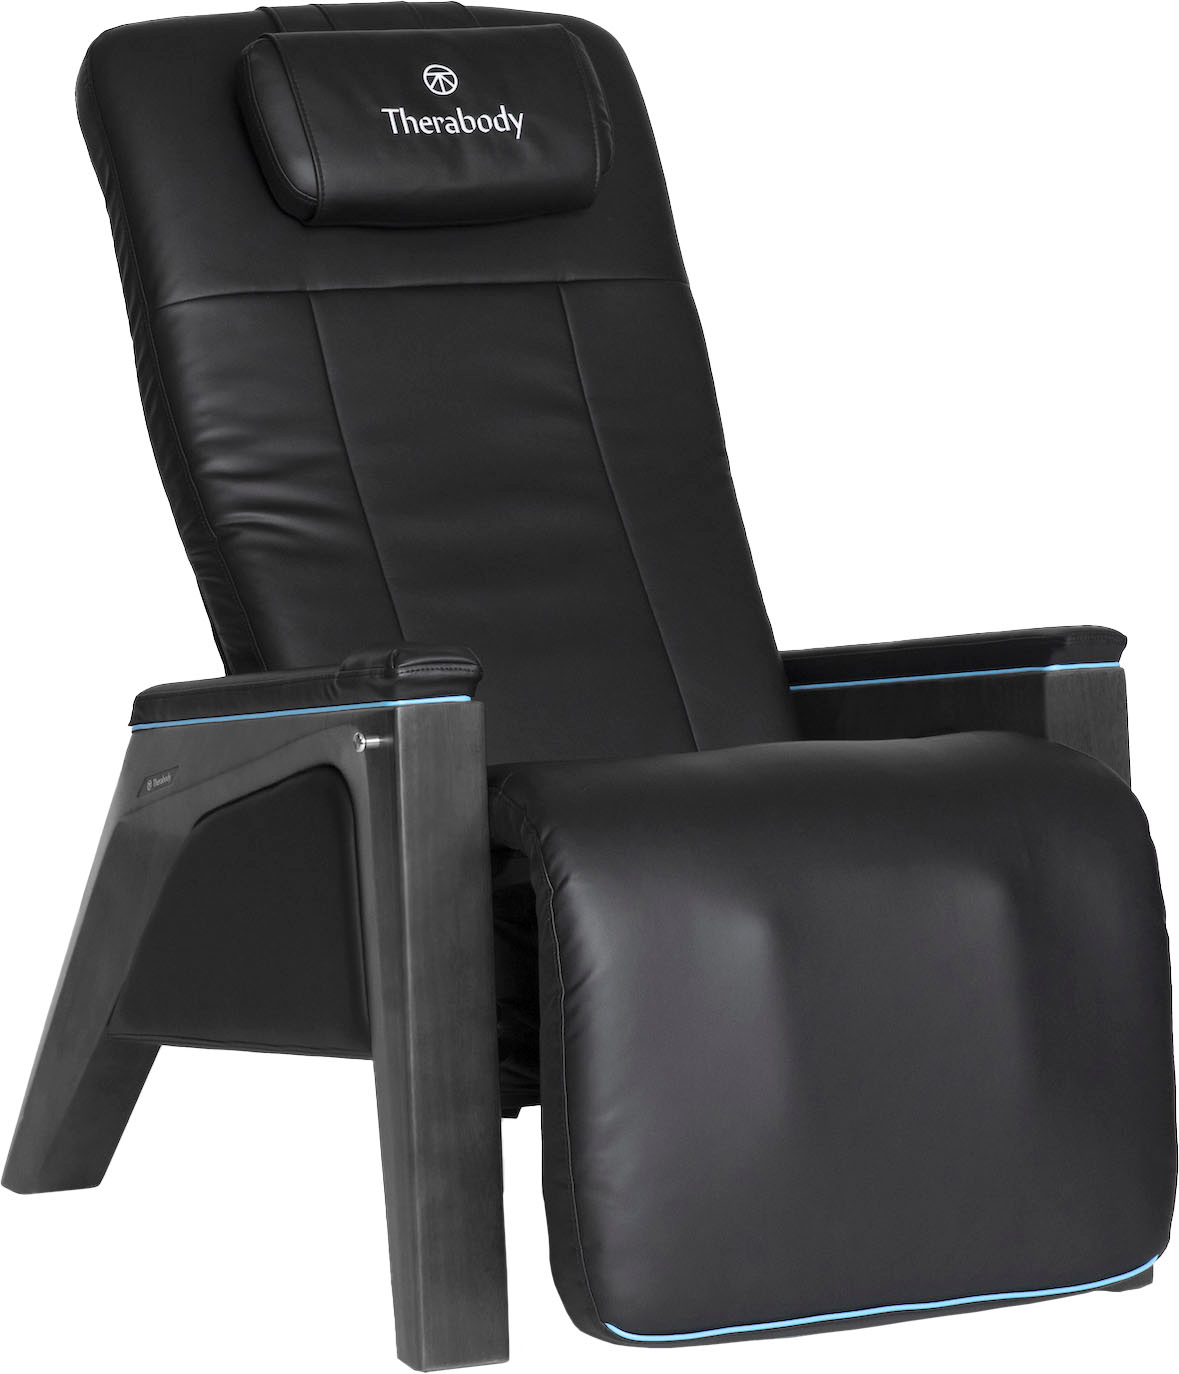 Therabody Therasound Lounger Black TB03407-01 - Best Buy